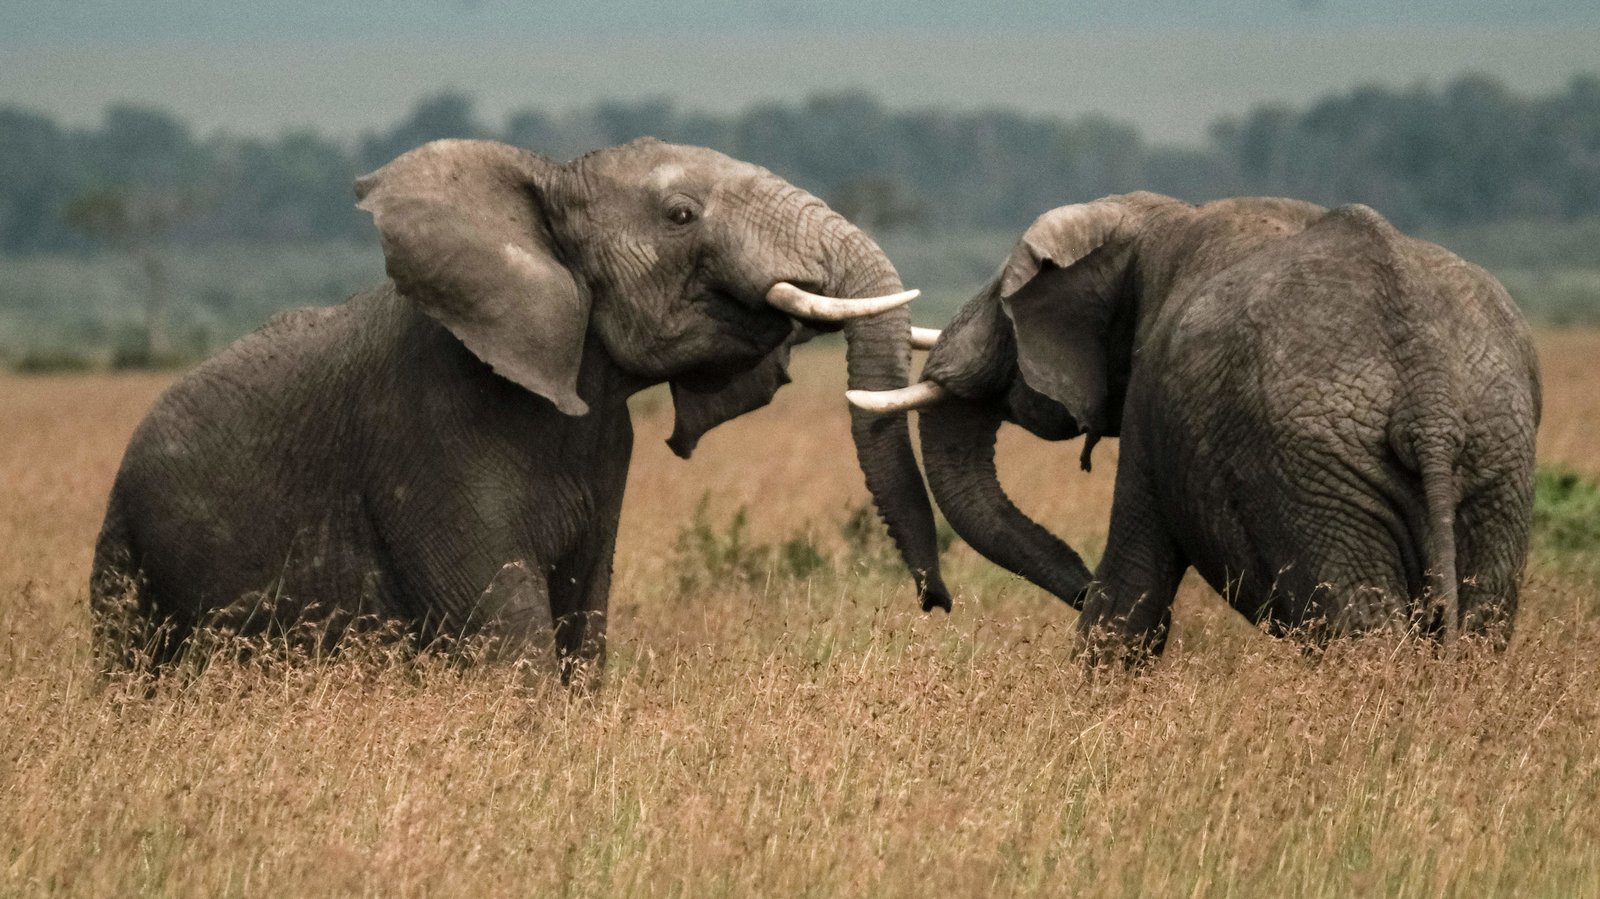 Two elephants play in a field in southern Kenya earlier this year.